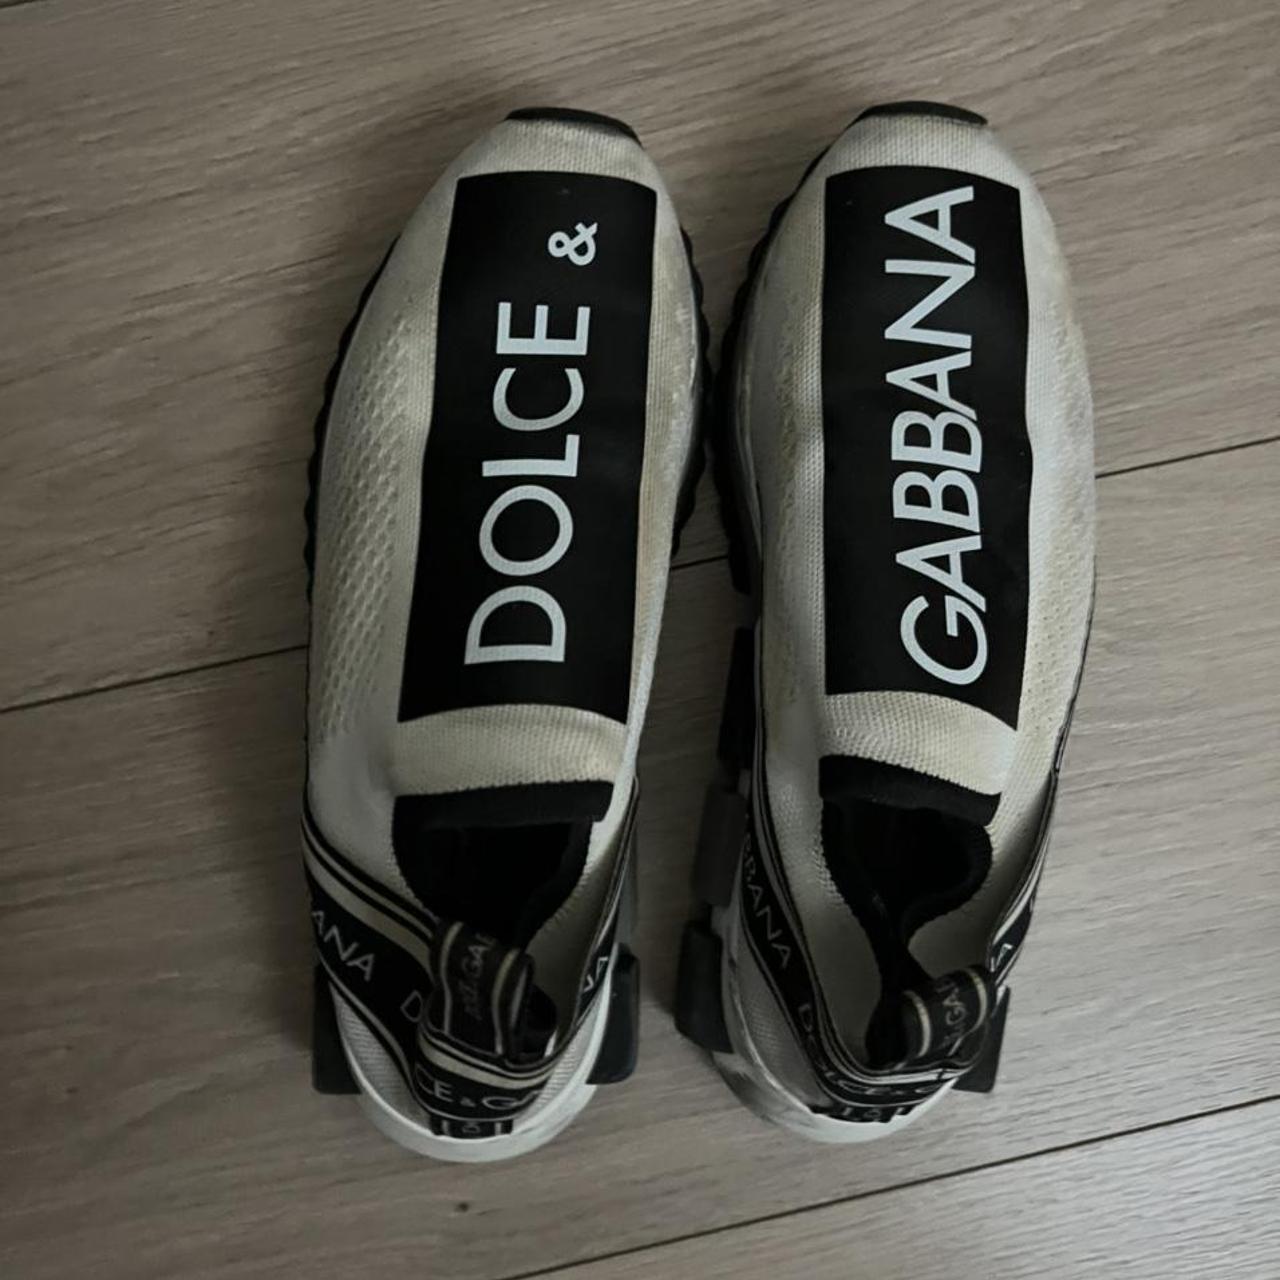 Dolce & Gabbana Women's Black and White Trainers (2)